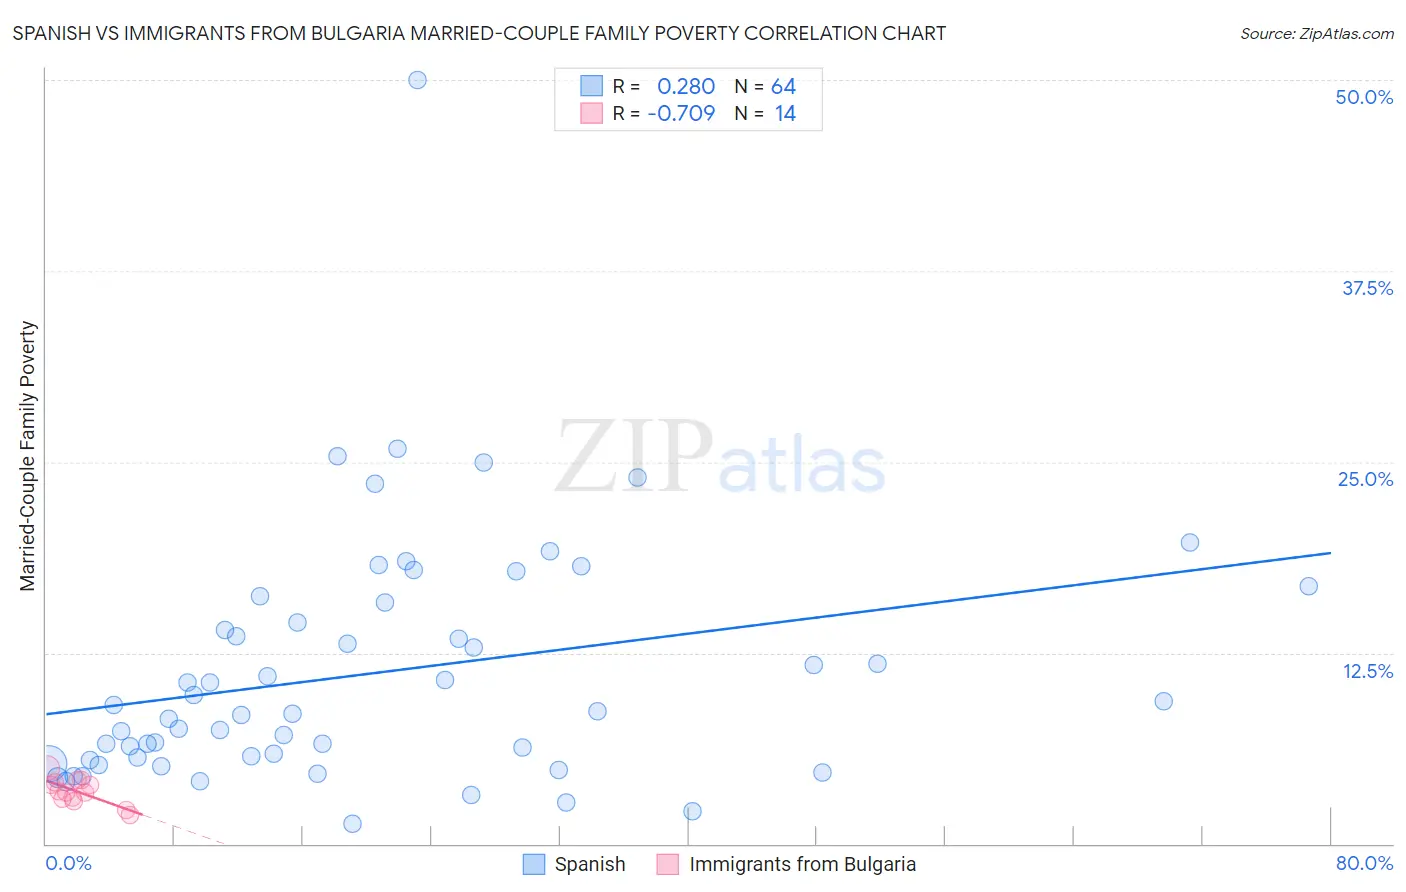 Spanish vs Immigrants from Bulgaria Married-Couple Family Poverty